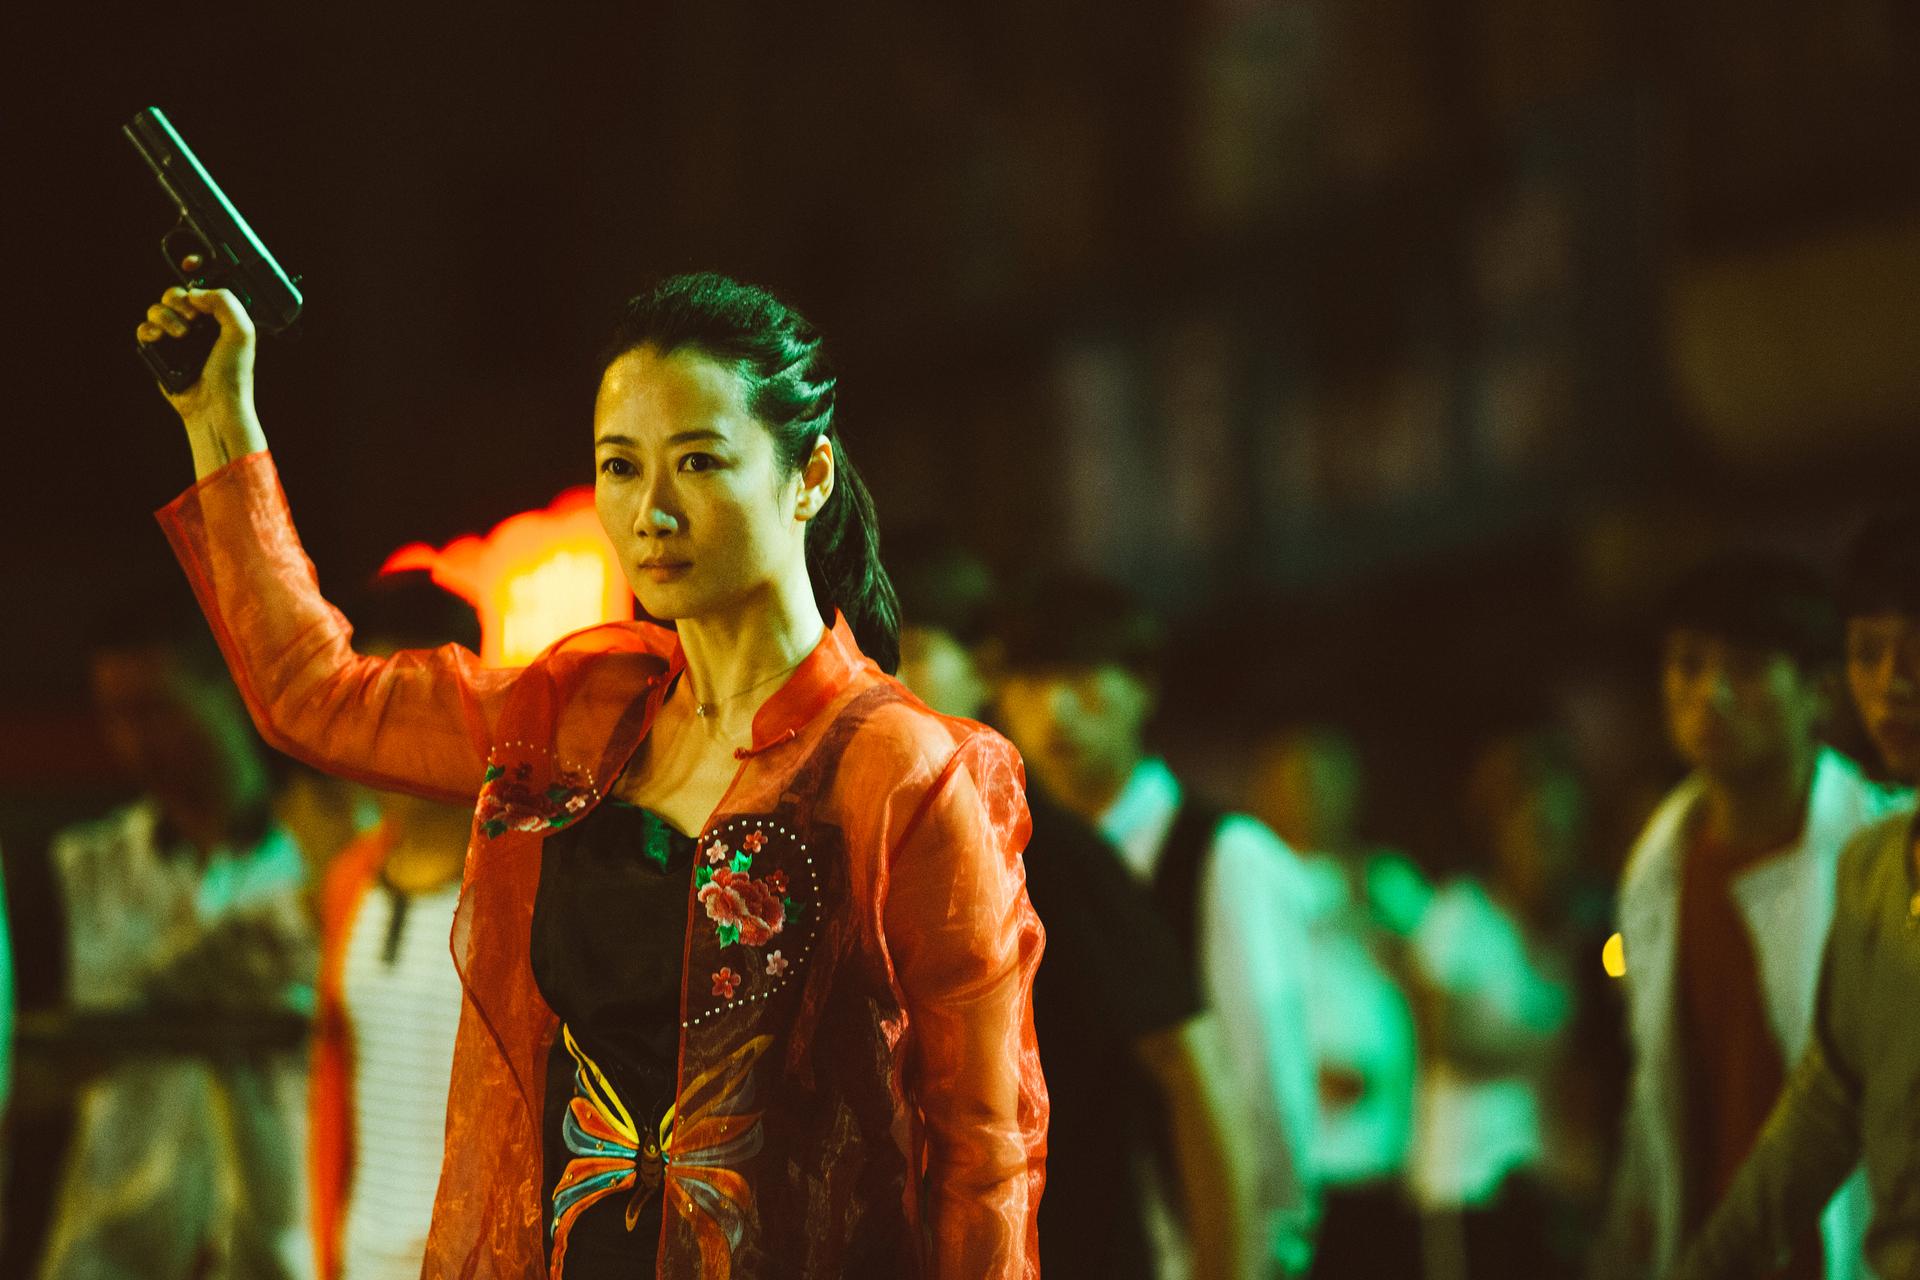 Zhao Tao as Qiao in “Ash is Purest White.”